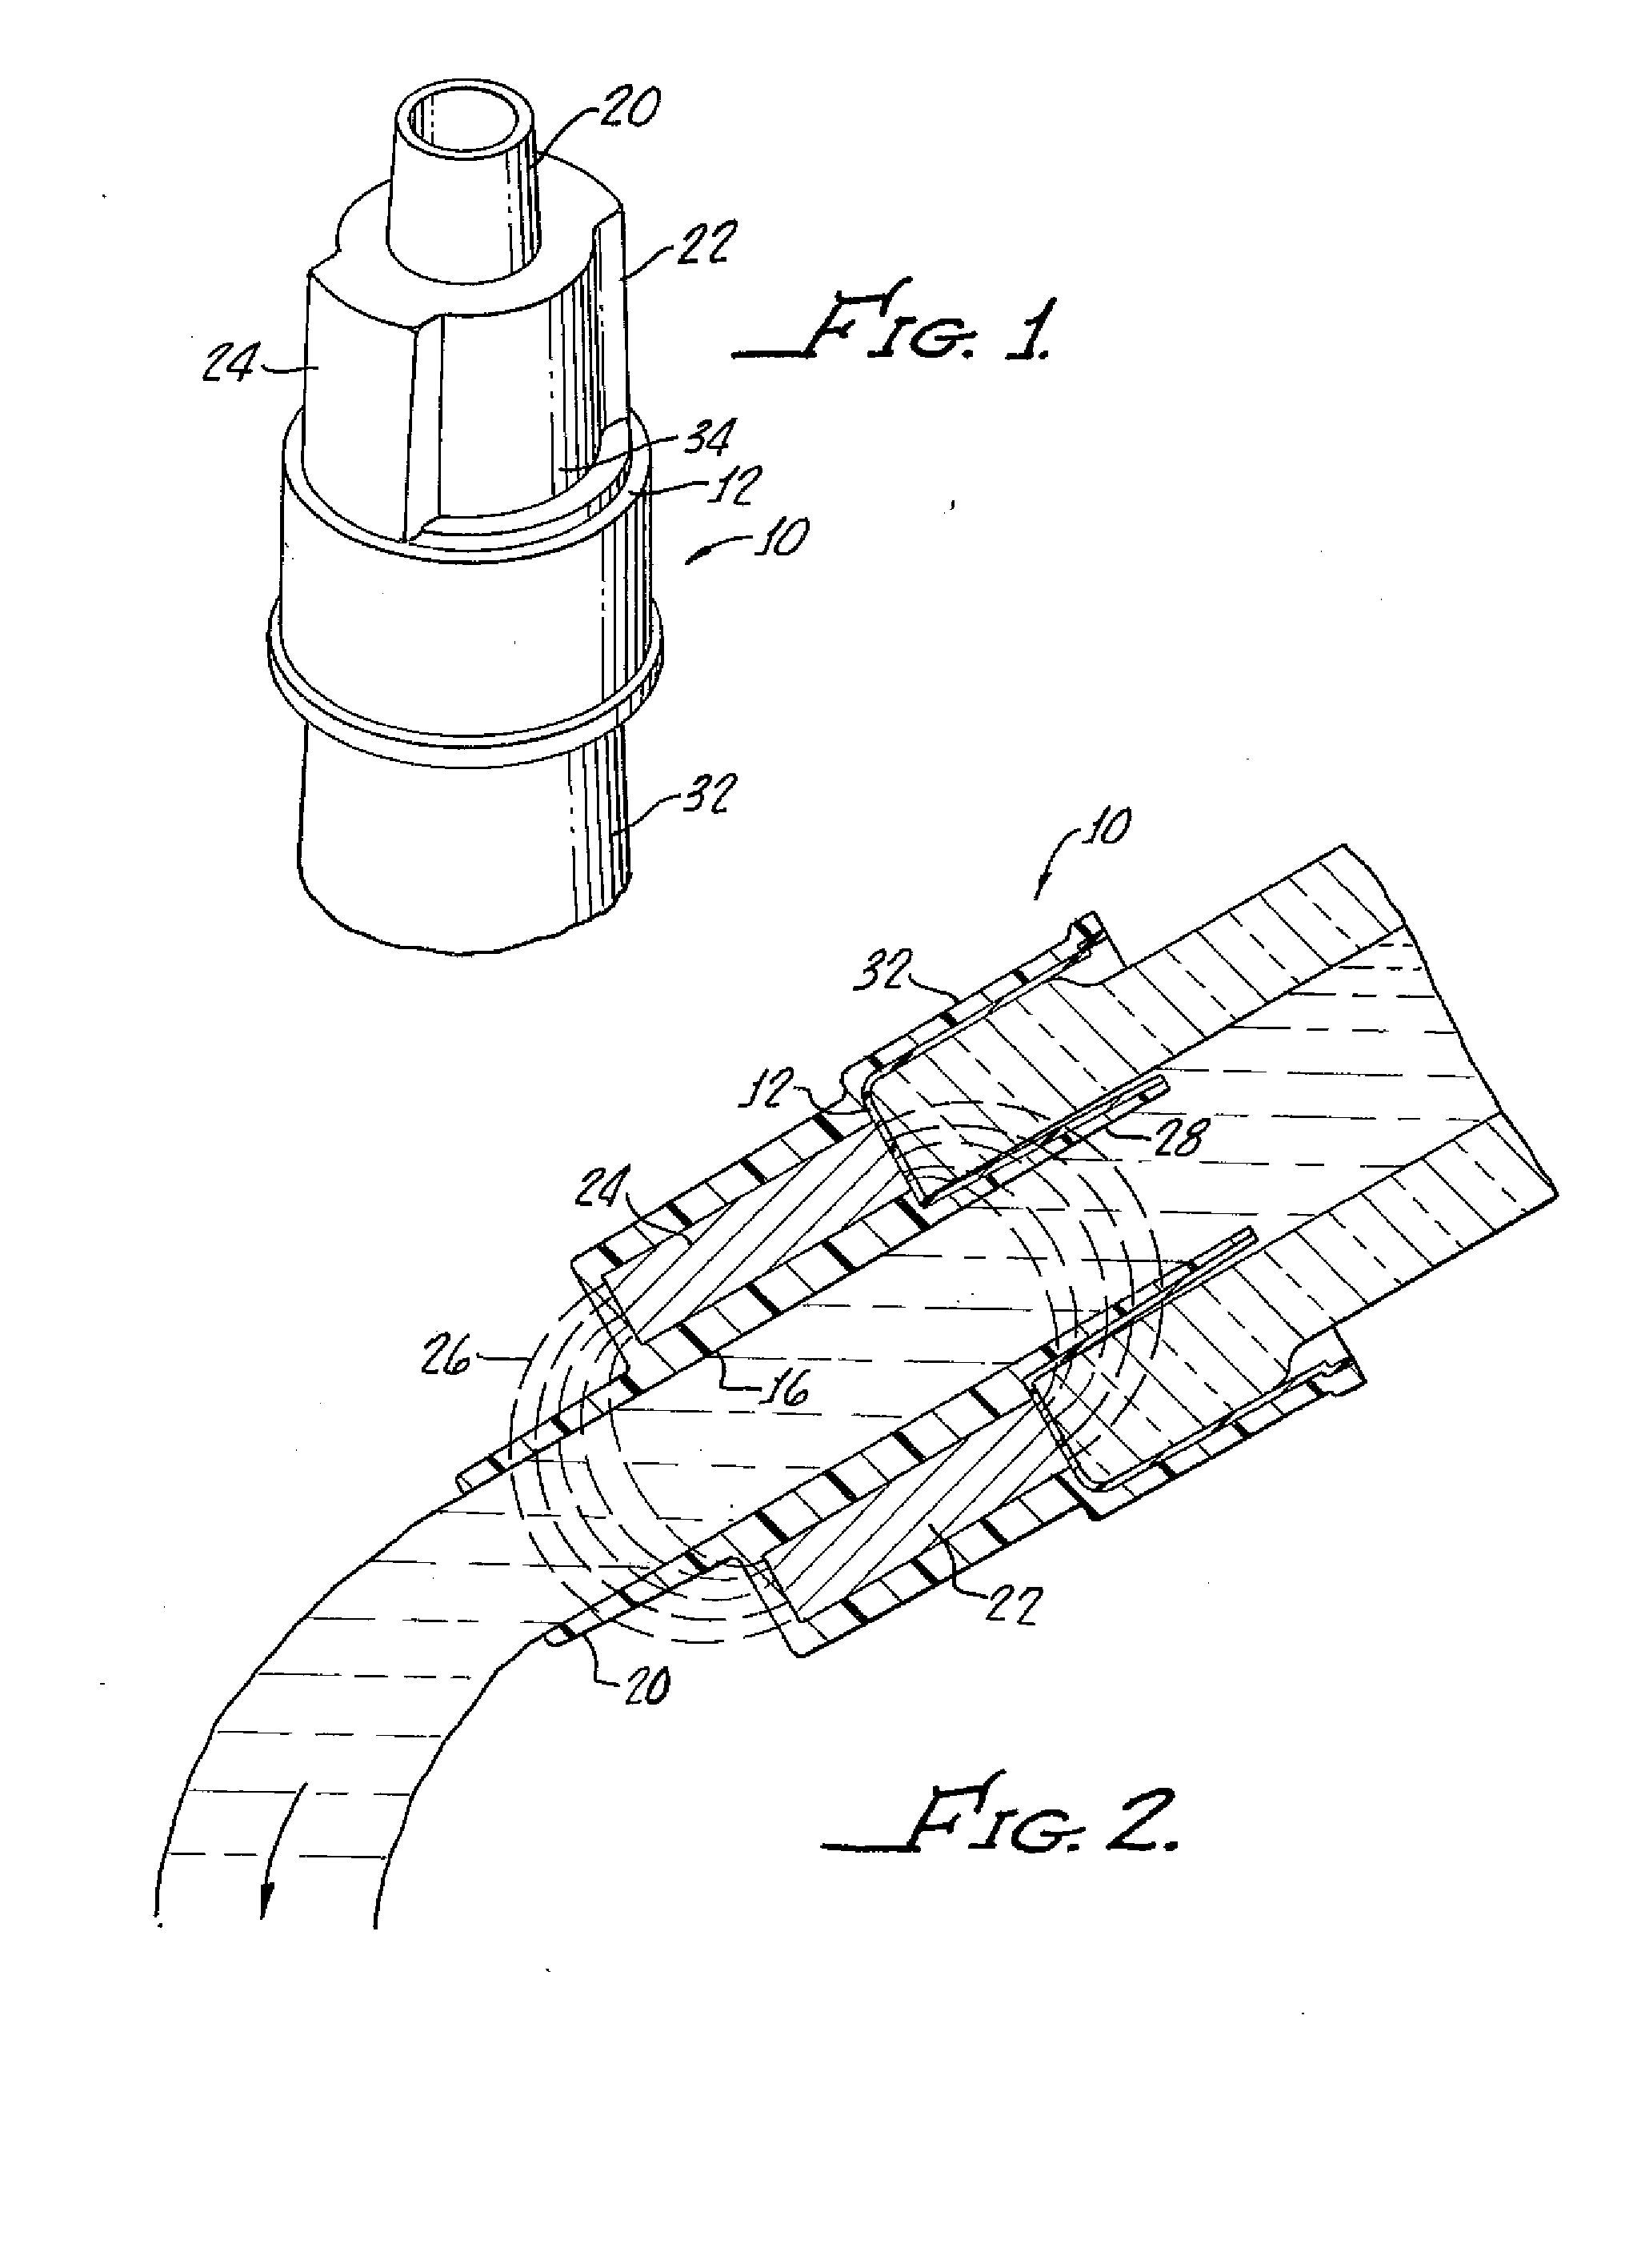 Device for reducing bitterness and astringency in beverages containing polyphenols and tannins